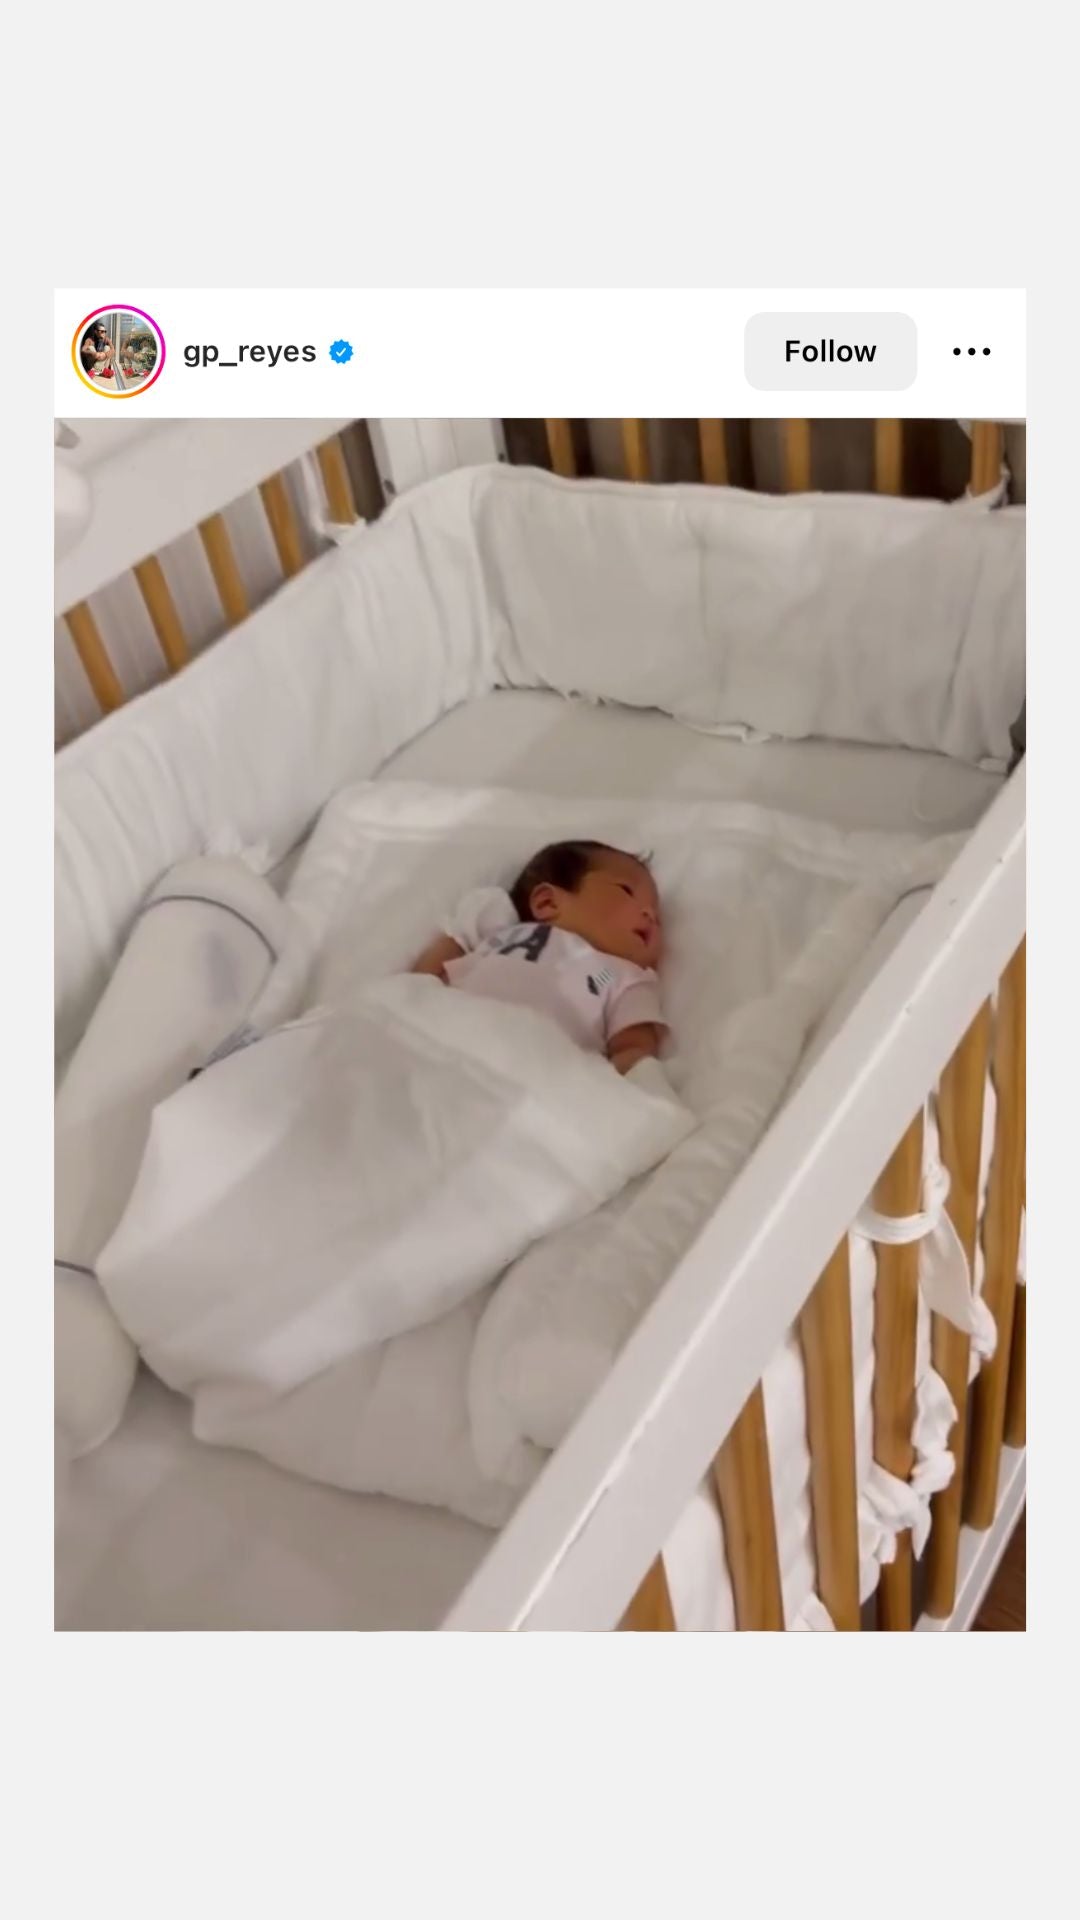 ava and ava ph review buttery breathable soft organic bamboo lyocell baby comforter bedding set (fitted crib sheet, pillowcases, pillows, bolsters) in white with personalized embroidery name by gp reyes andi manzano reyes lucia